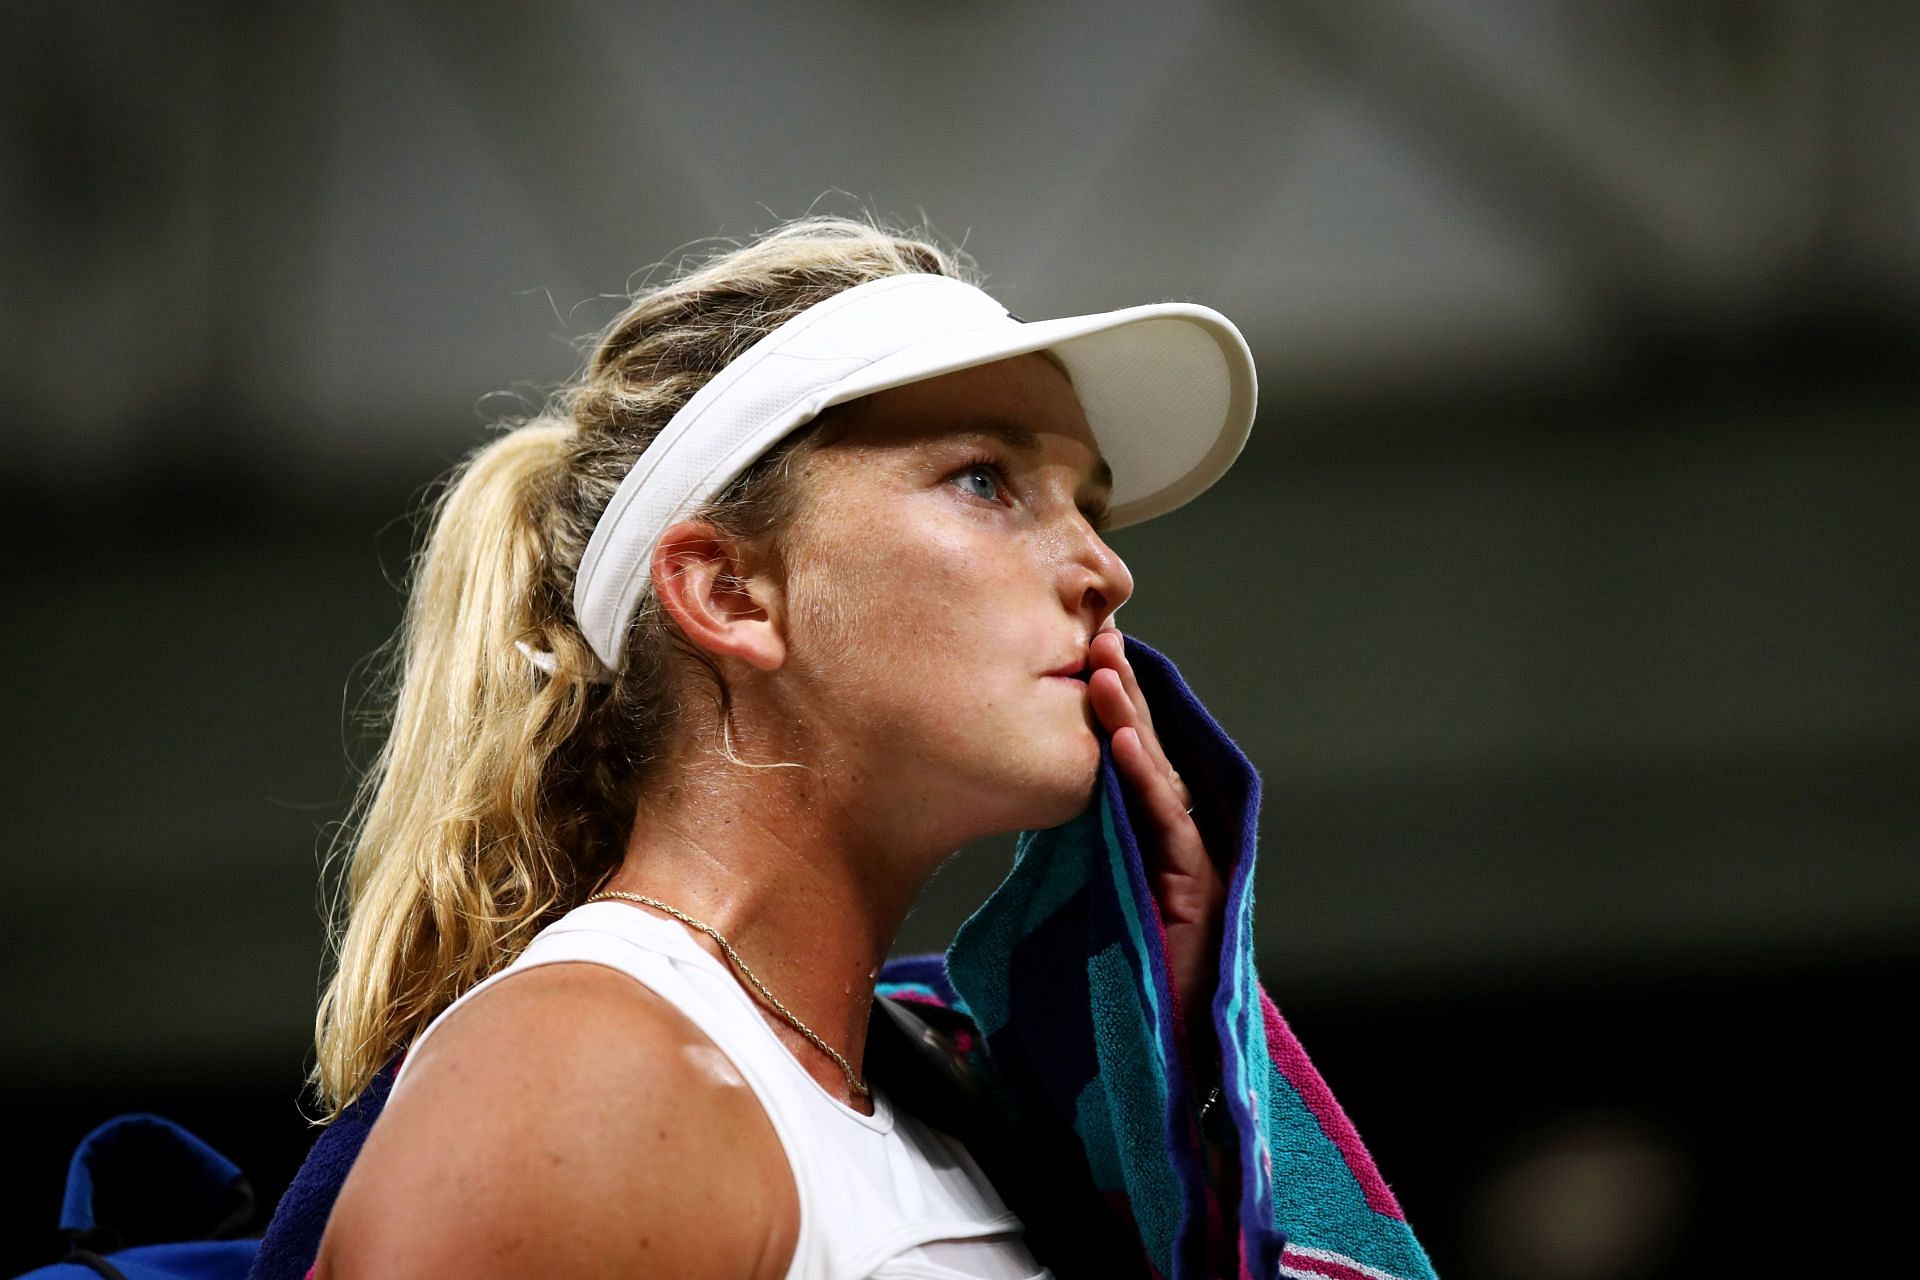 Coco Vandeweghe fell in the qualification rounds at Wimbledon this year.